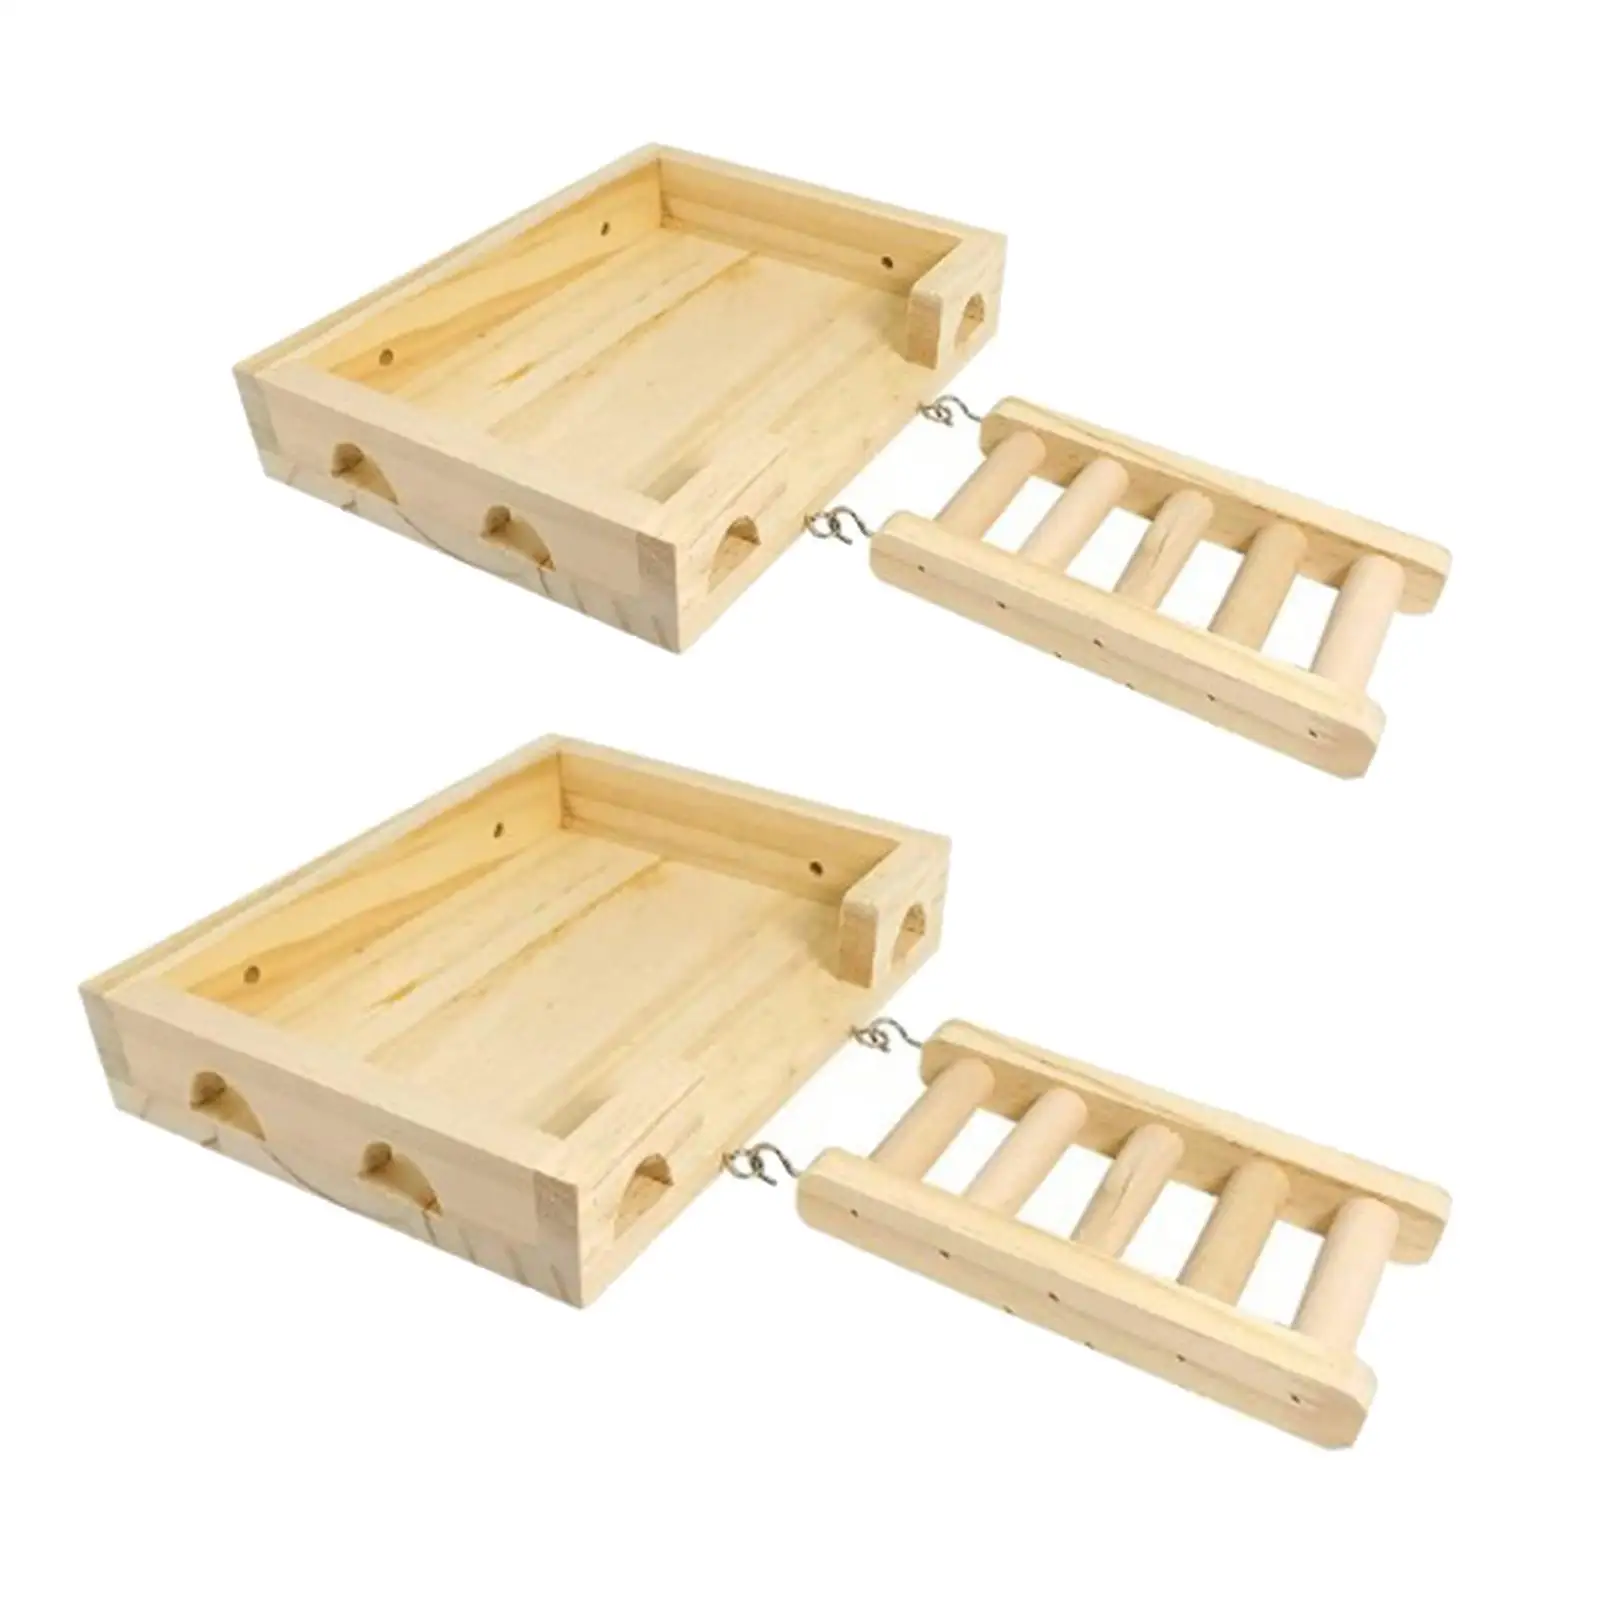 Hamster Wooden Ladder Toy Accessories Portable Playground Platform Play Toys Chewing Toy Chewing Exercise Toy Wooden Bird Ladder